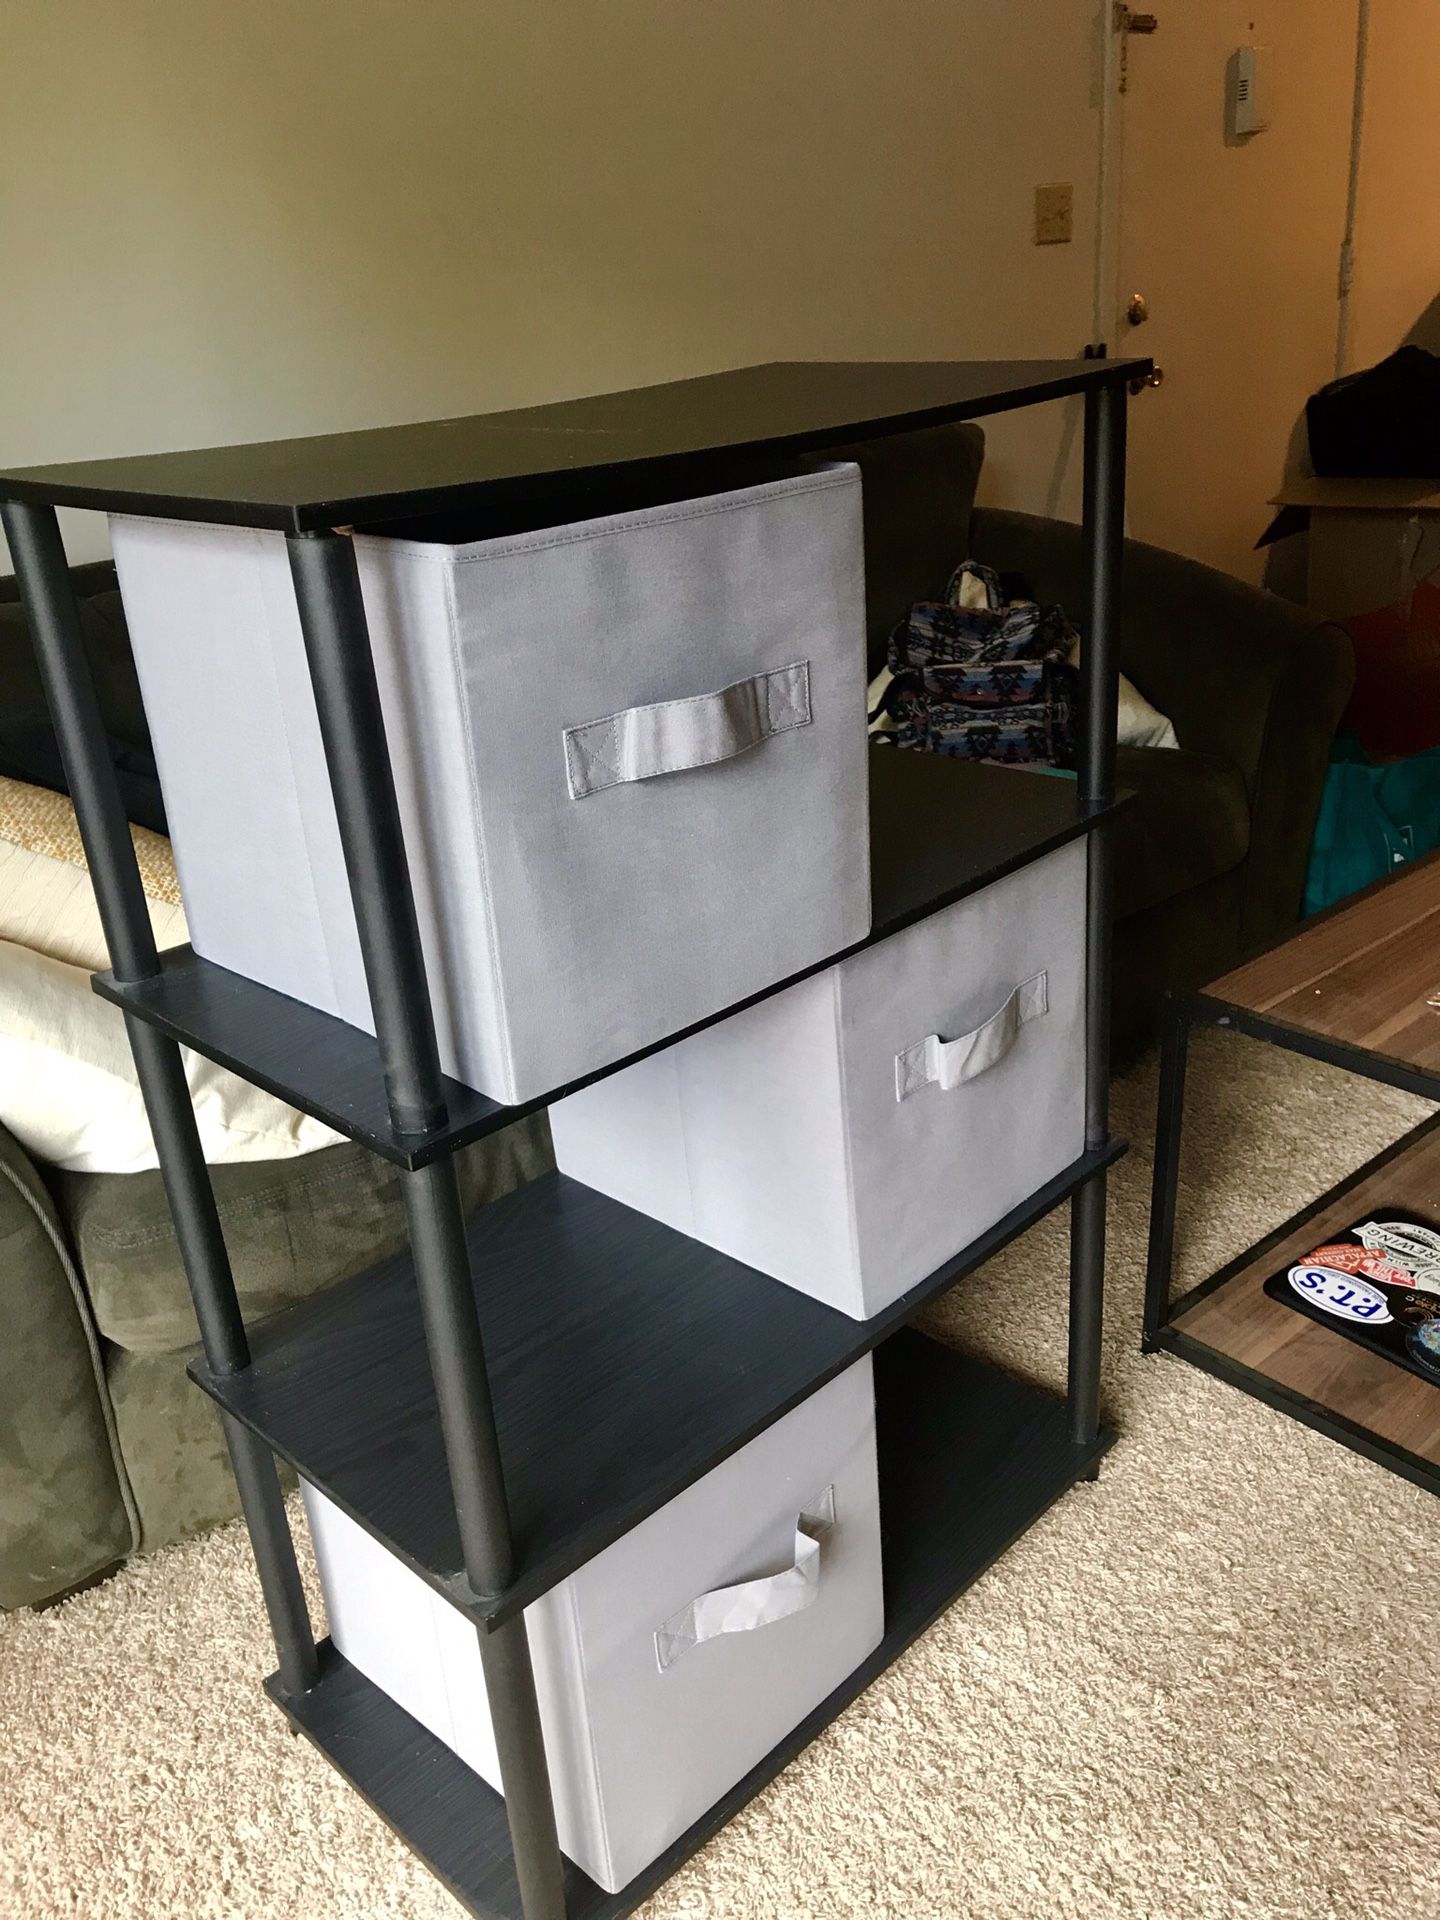 Shelving unit with collapsible storage bins